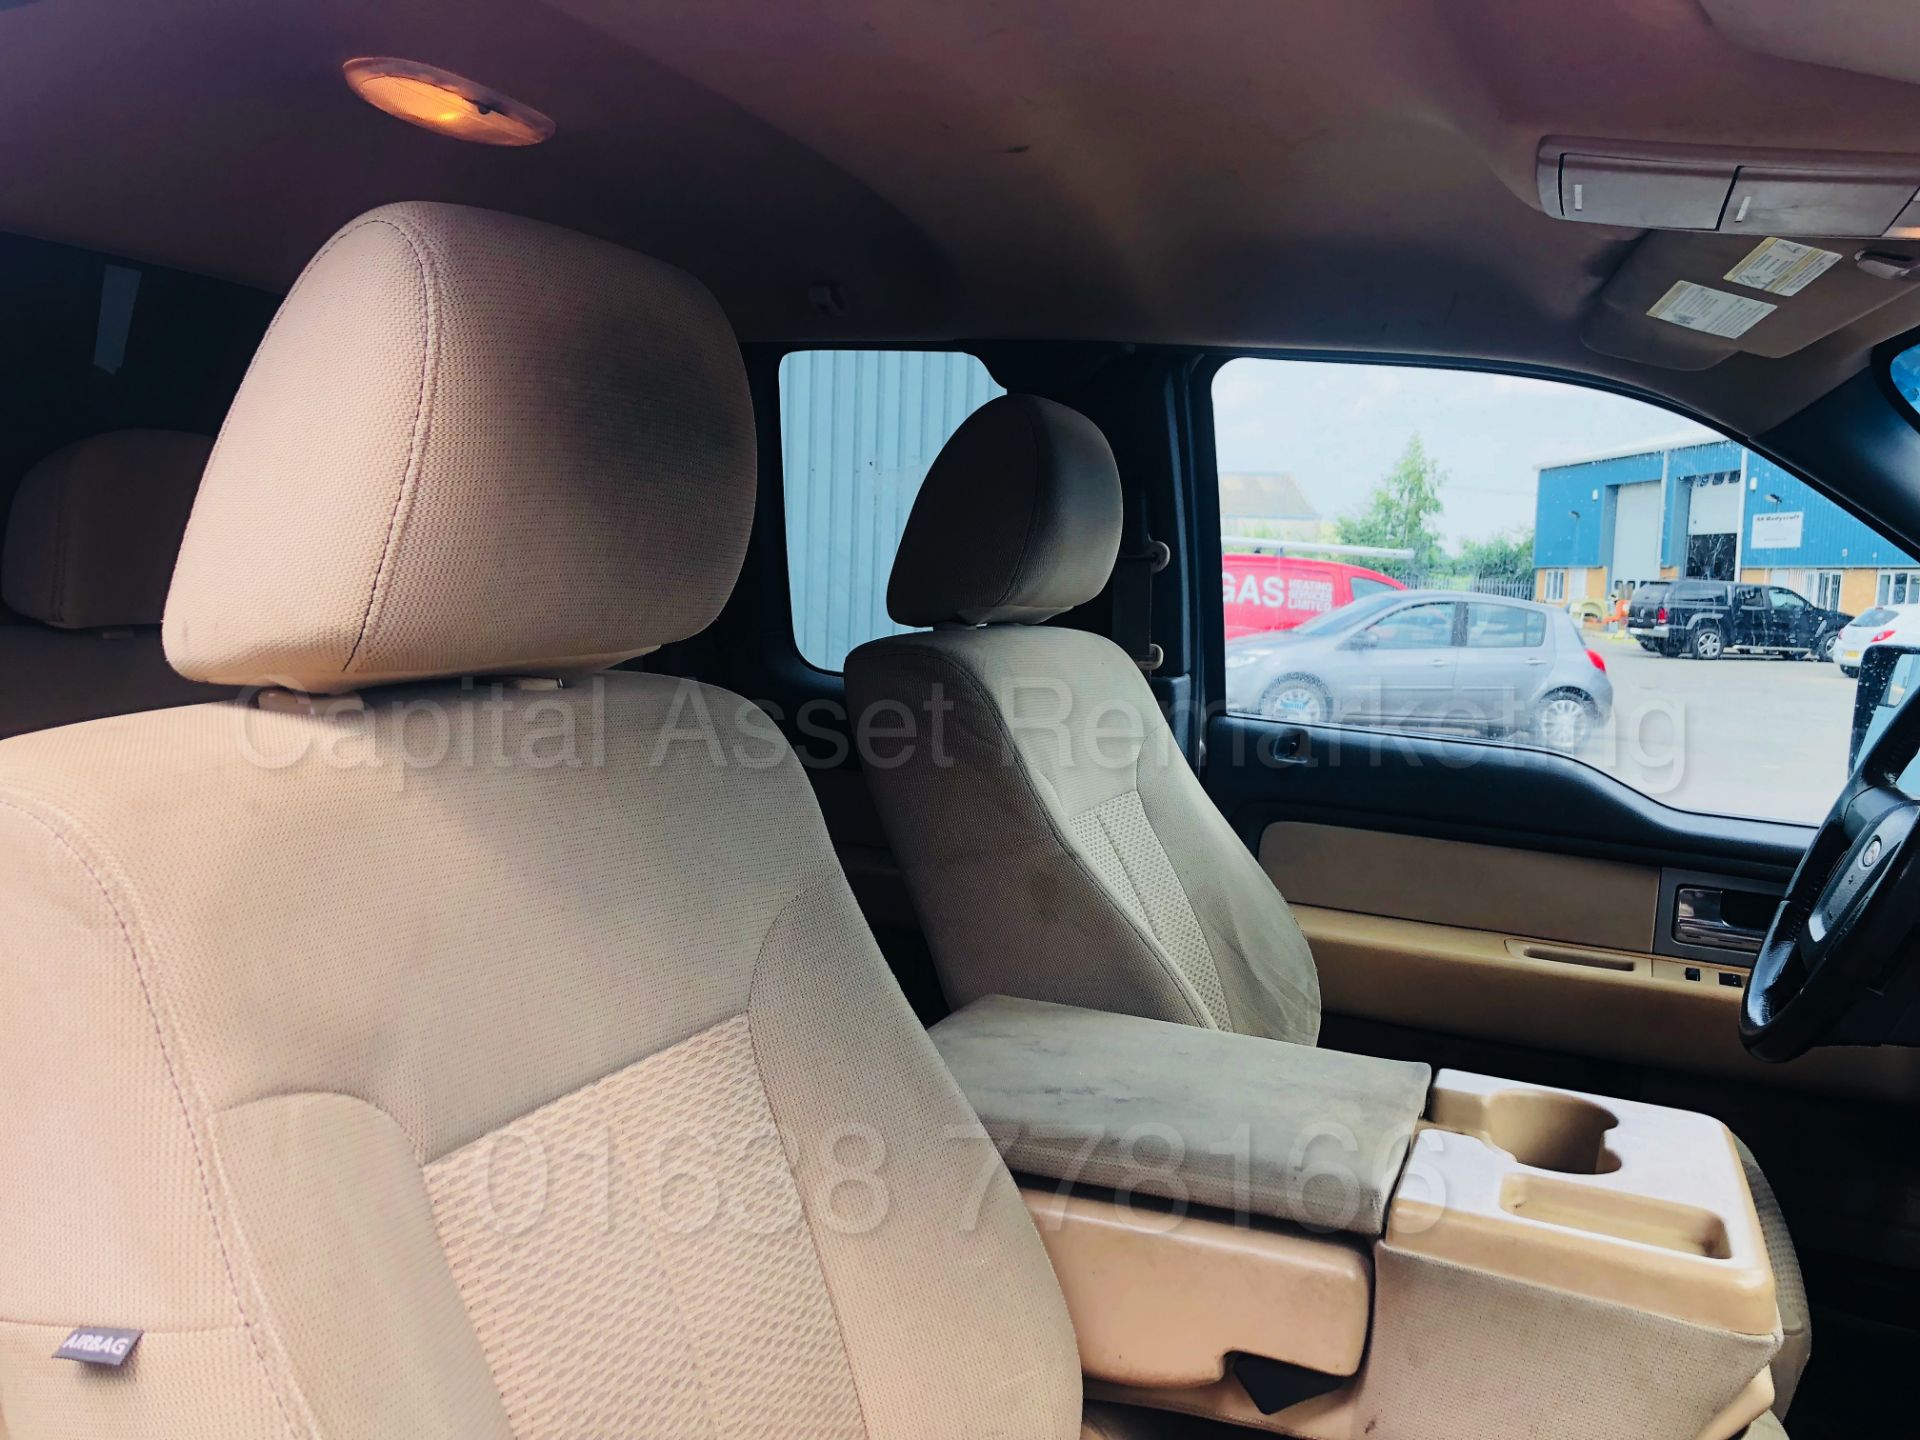 (On Sale) FORD F-150 5.4 V8 XLT EDITION KING-CAB (2012) MODEL**4X4**6 SEATER**AUTOMATIC *TOP SPEC* - Image 26 of 52